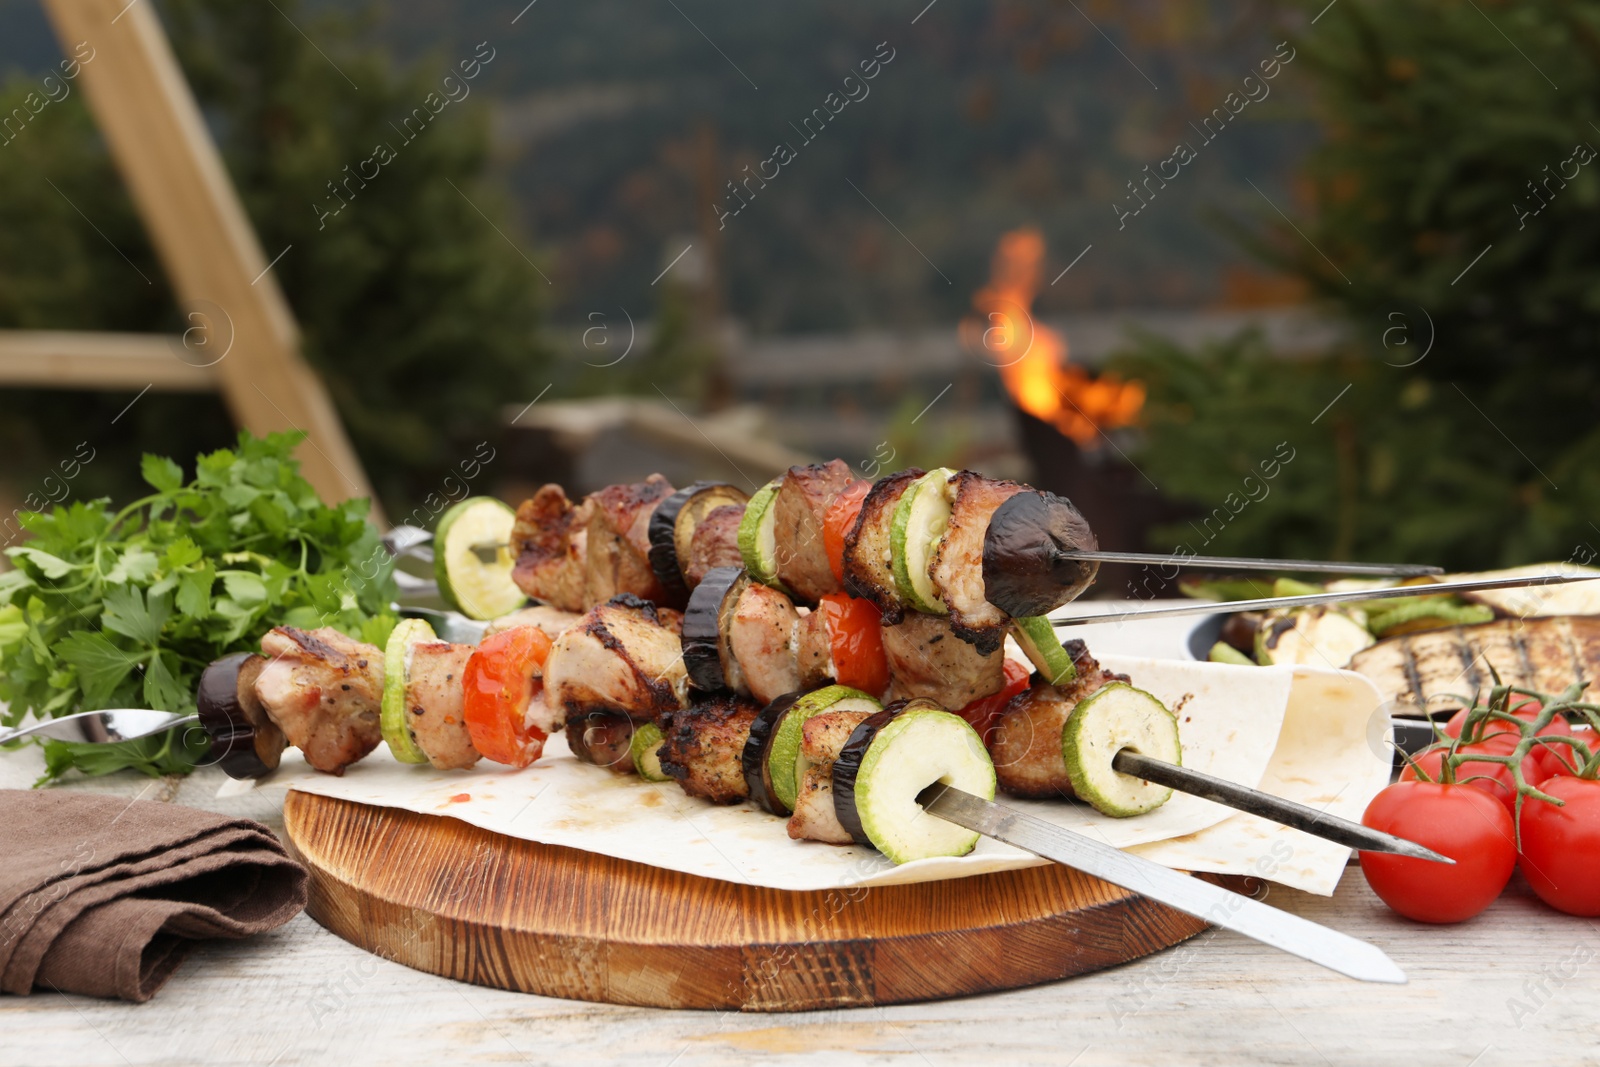 Photo of Metal skewers with delicious meat and vegetables served on wooden table outdoors